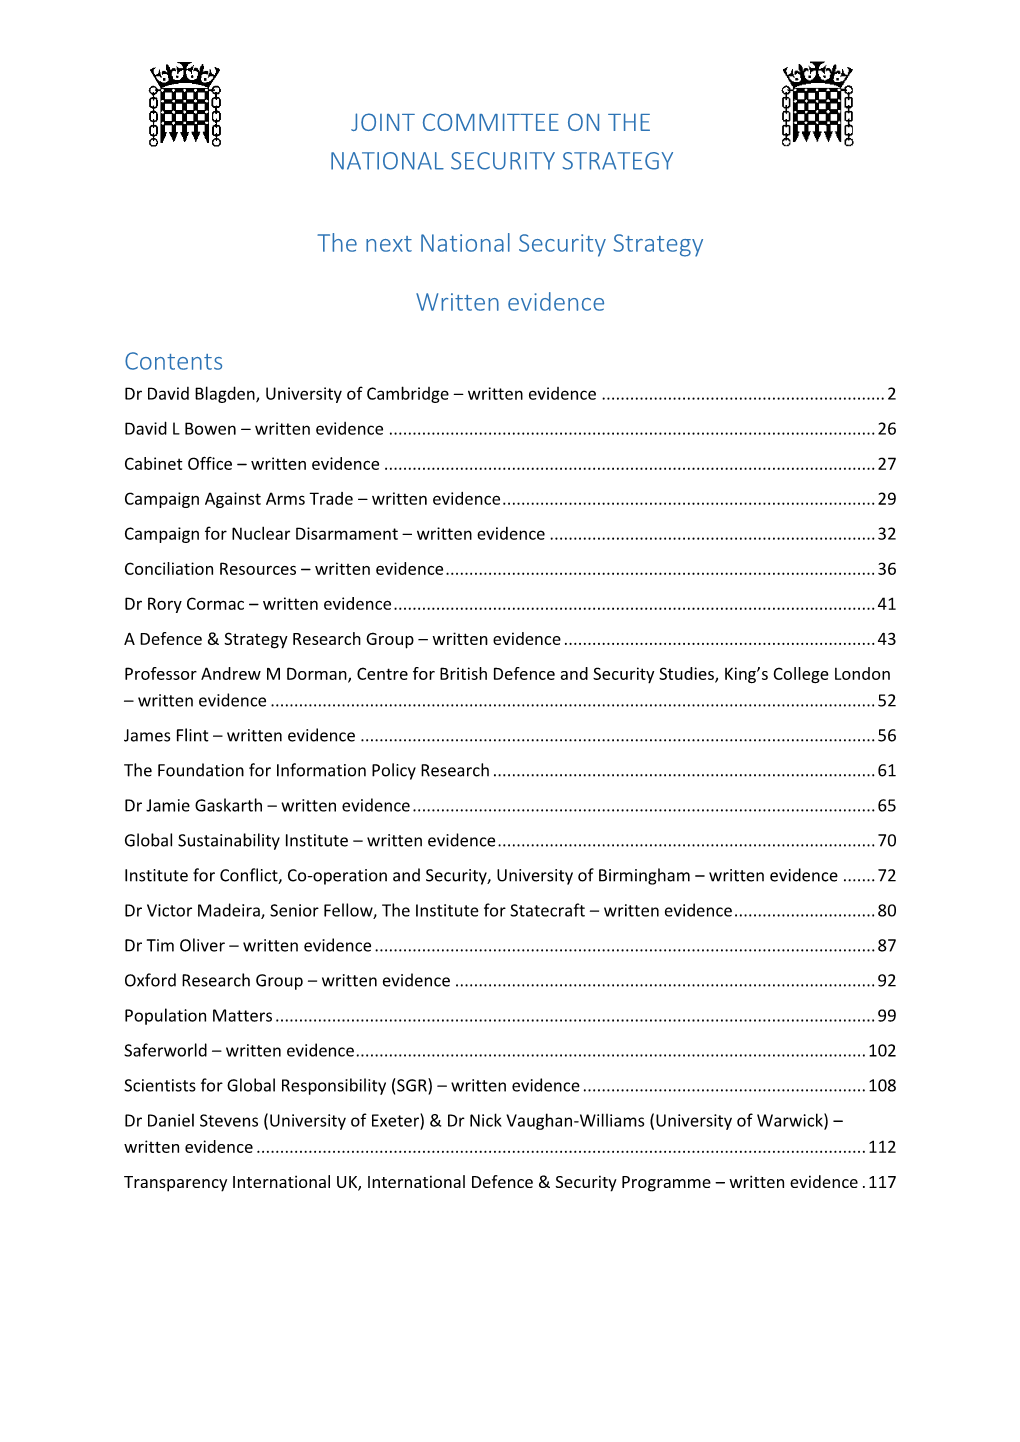 Joint Committee on the National Security Strategy: Priorities for the 2015 NSS